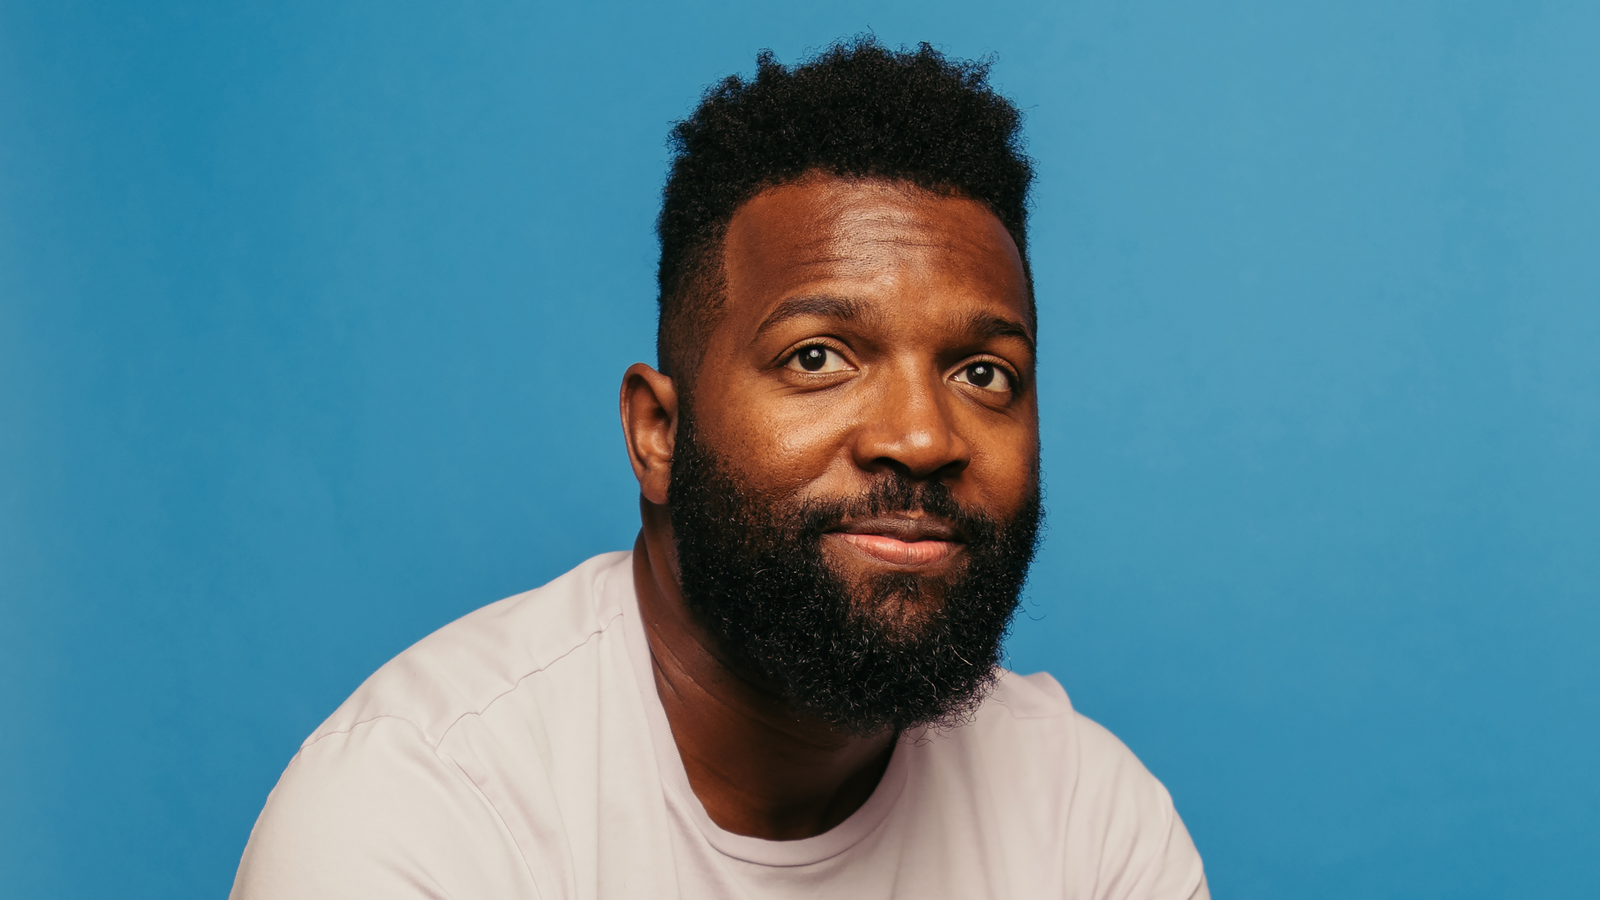 Podcast Mixtape: How to Citizen with Baratunde Thurston